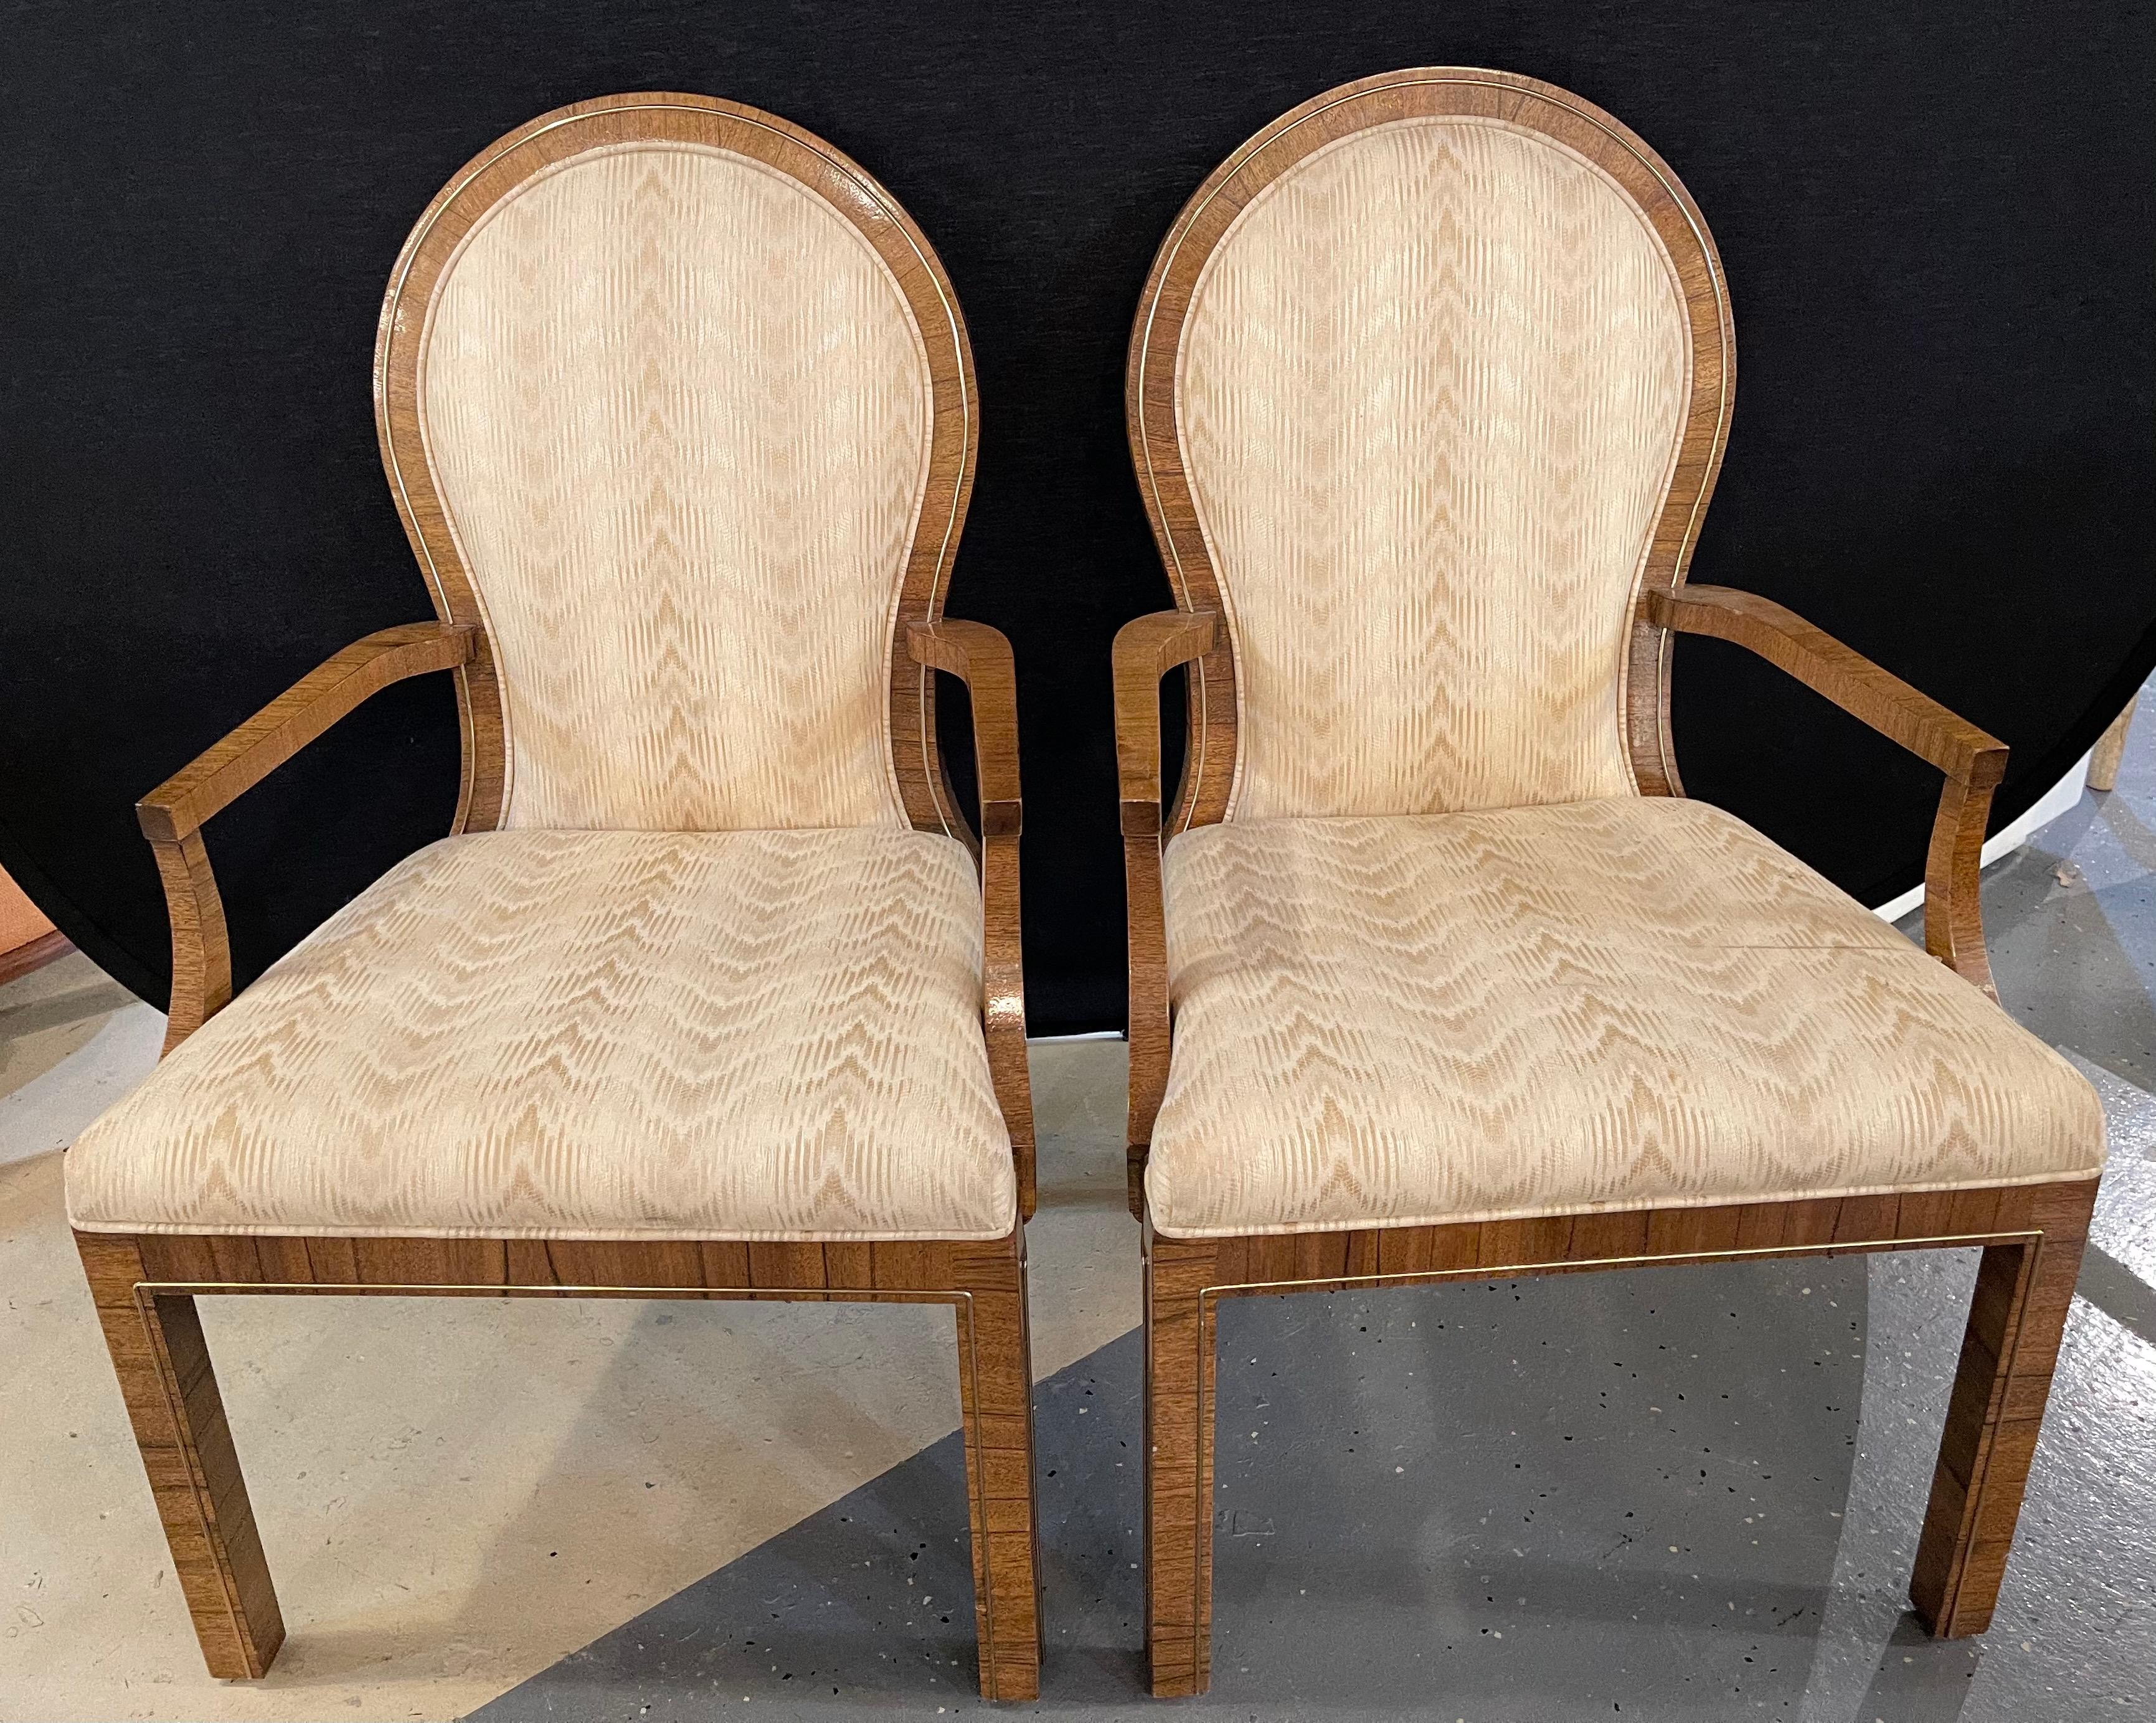 Pair of Mid-Century Modern arm chairs by Milo Baughman. Each with burlwood frames having brass framing. Made by Mastercraft.